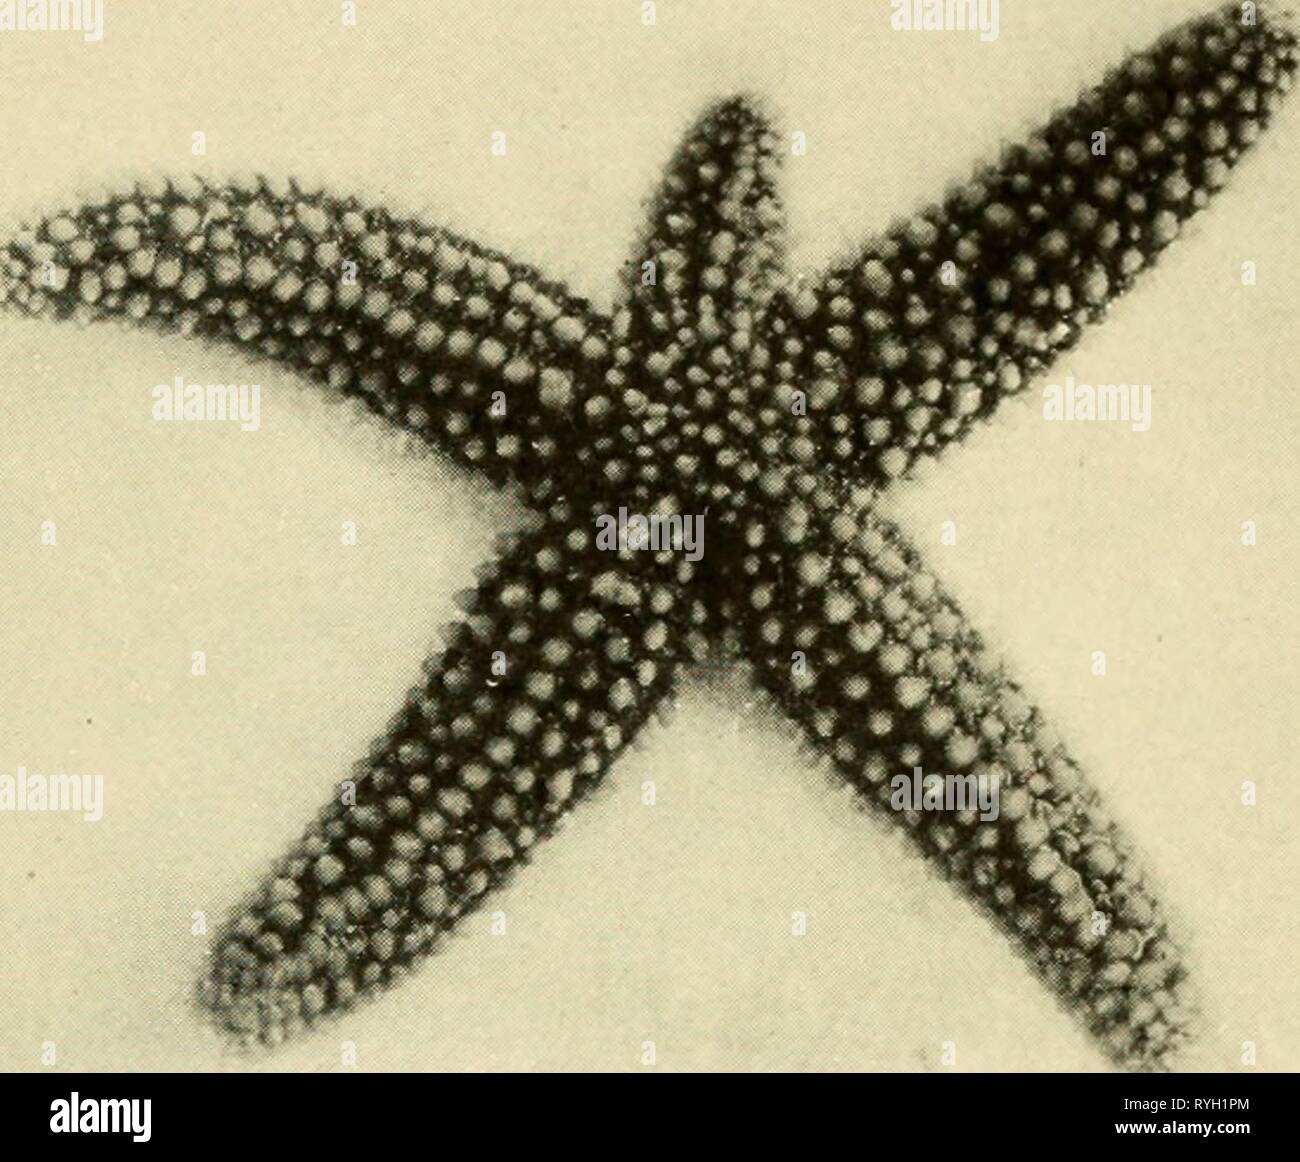 Dwellers of the sea and shore  dwellersofseasho00crow Year: 1935  The StiirfisJi and Its Kindred 51 colored. Traveling in droves, as starfishes sometimes do, they range from low-water mark to depths of six hundred fathoms or inore. The brittle stars are so called because of their ex- treme tendency to break off their limbs when captured. They are much less abundant than the common star- fishes, and their secretiveness makes them hard to find.    ASTERIAS; THE COMMON STARFISH. THIS INDIVIDUAL IS GROWING A NEW ARM IN THE PLACE OF ONE THAT WAS LOST. Although some specimens live near the shore, th Stock Photo